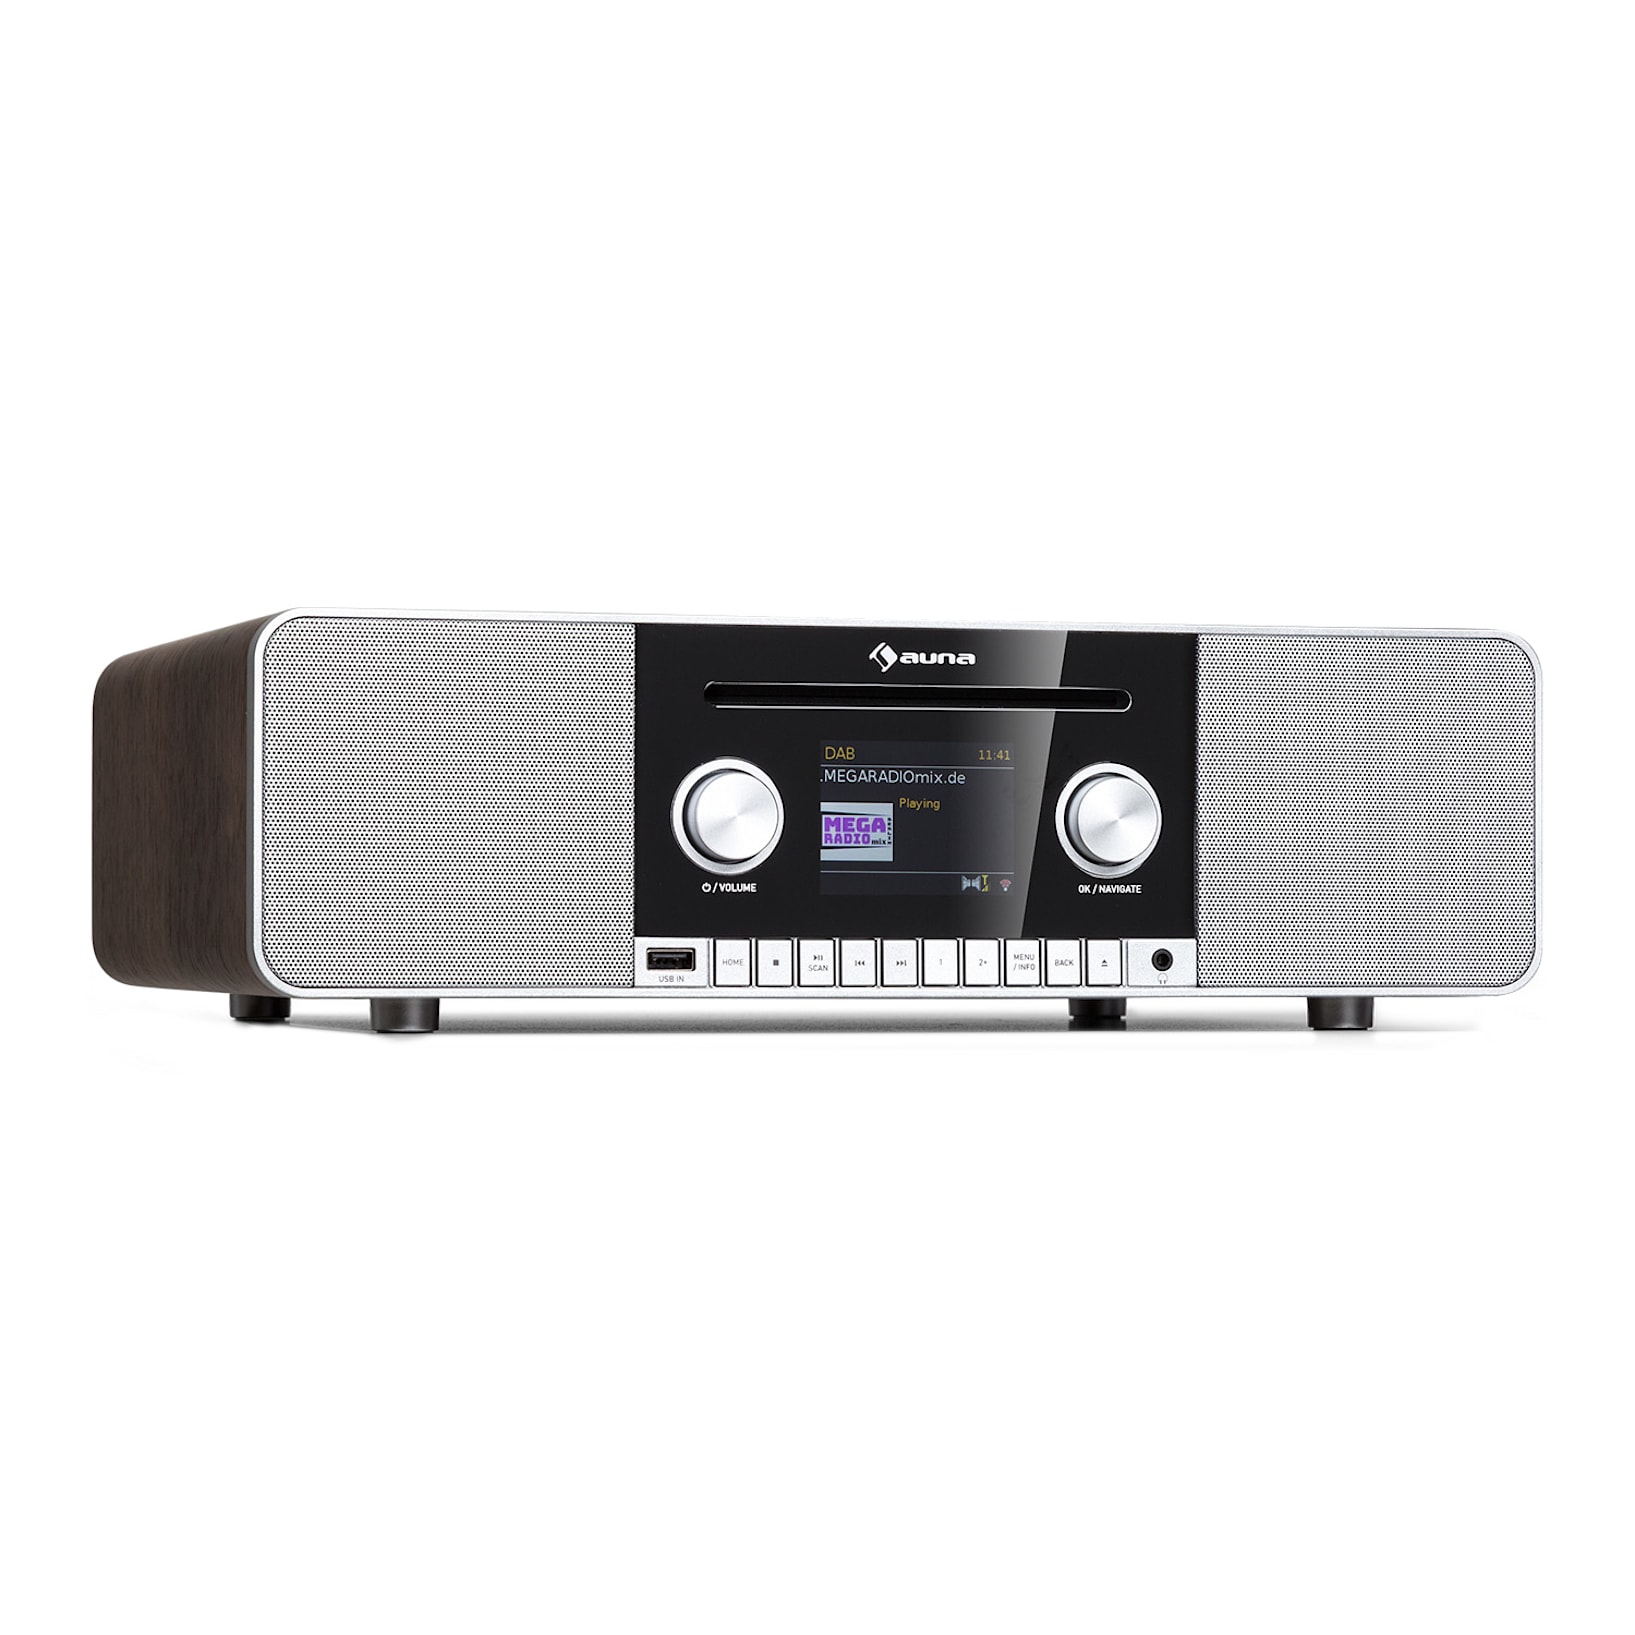 Connect CD MKII Internet Radio | CD player | internet radio | media player  | Spotify Connect | UPnP | DLNA | app control | DAB+ | FM radio tuner |  Bluetooth | MP3 from CD and USB | AUX connection wood